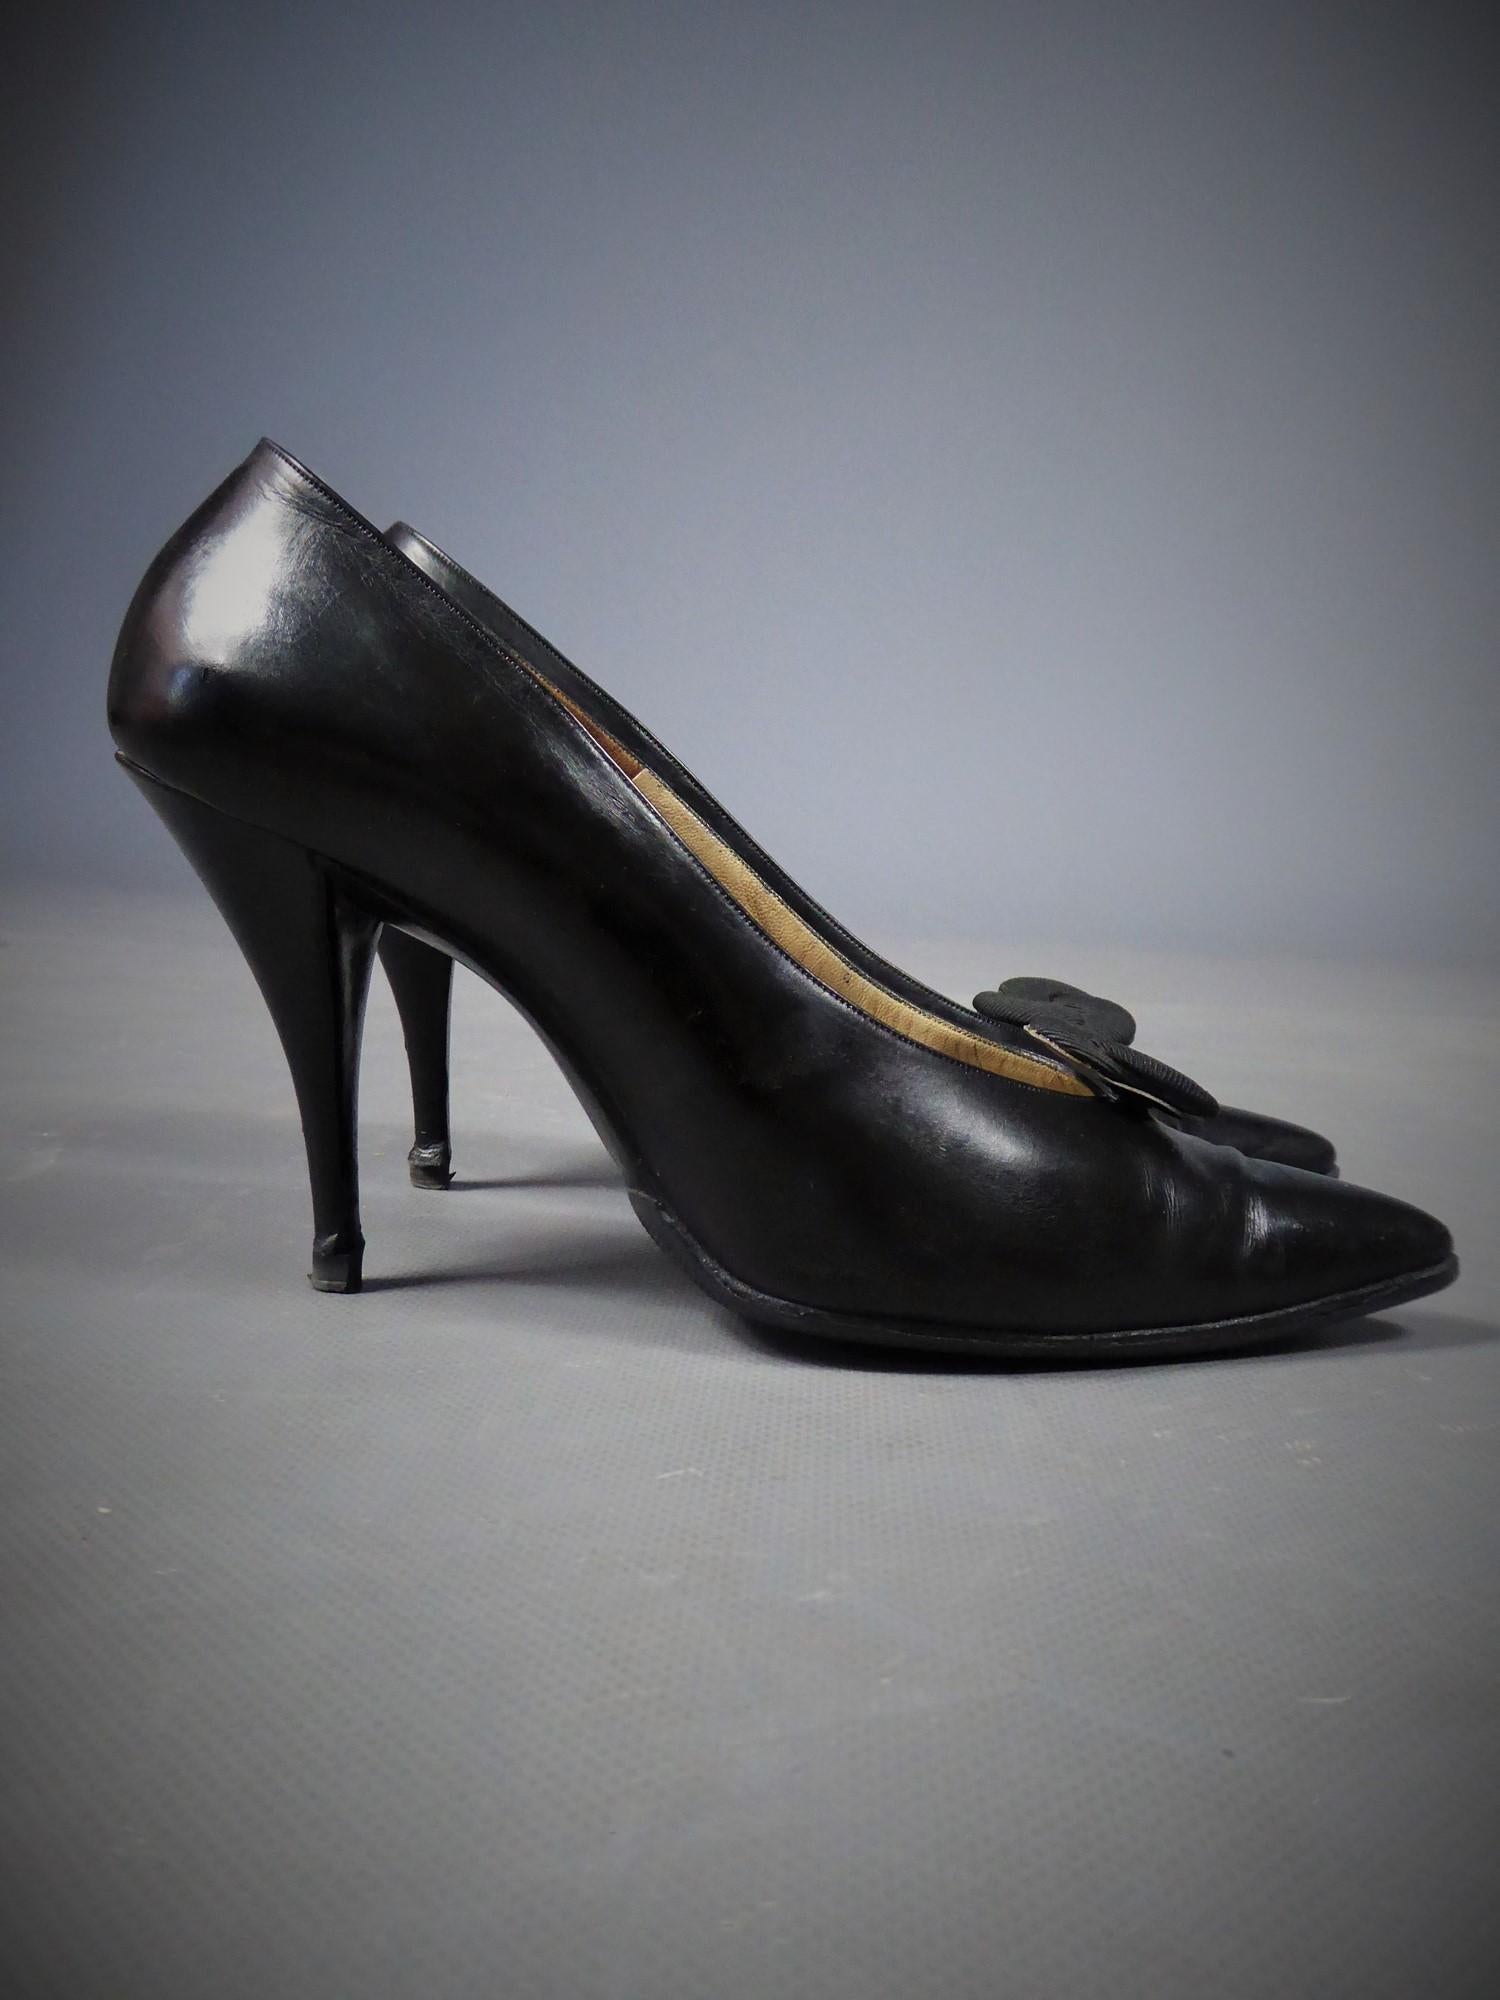 Circa 1960
France

Pair of Christian Dior evening heels by Roger Vivier in glossy black leather from the 60s. Shoes with stiletto heels, curved shape and pointed at the front, decorated with a removable rosette in black fluted silk ottoman. Inside